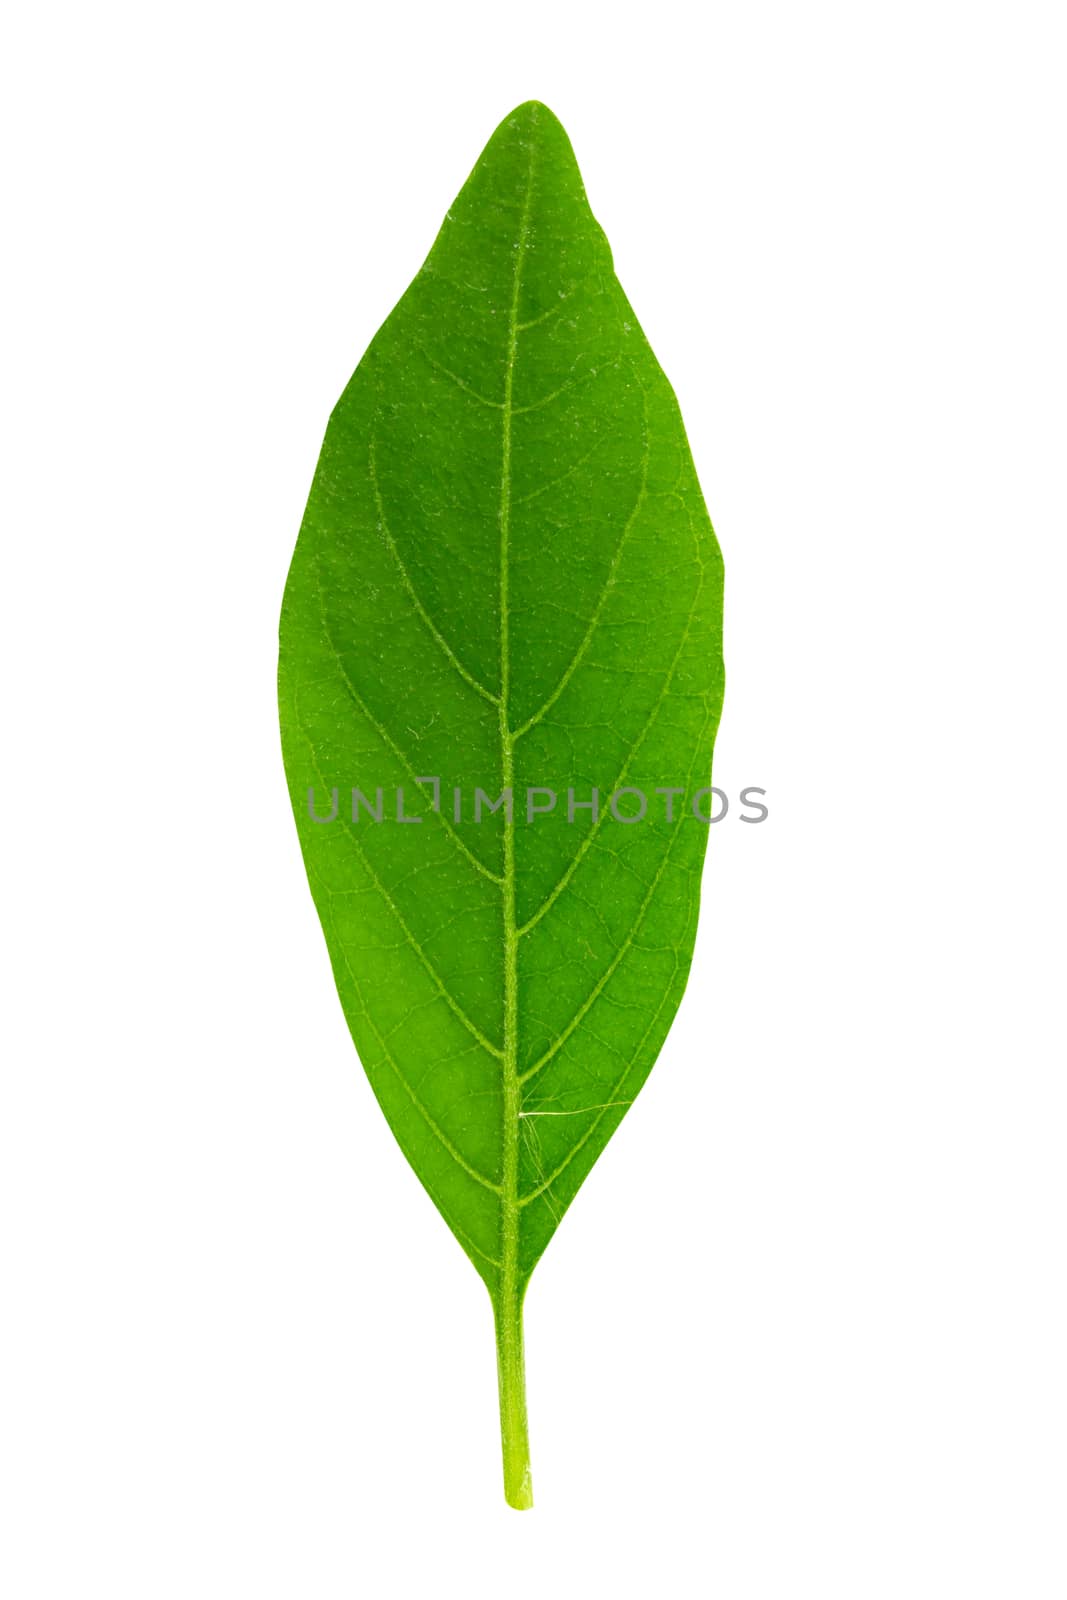 leaf isolated on a white background with clipping path.